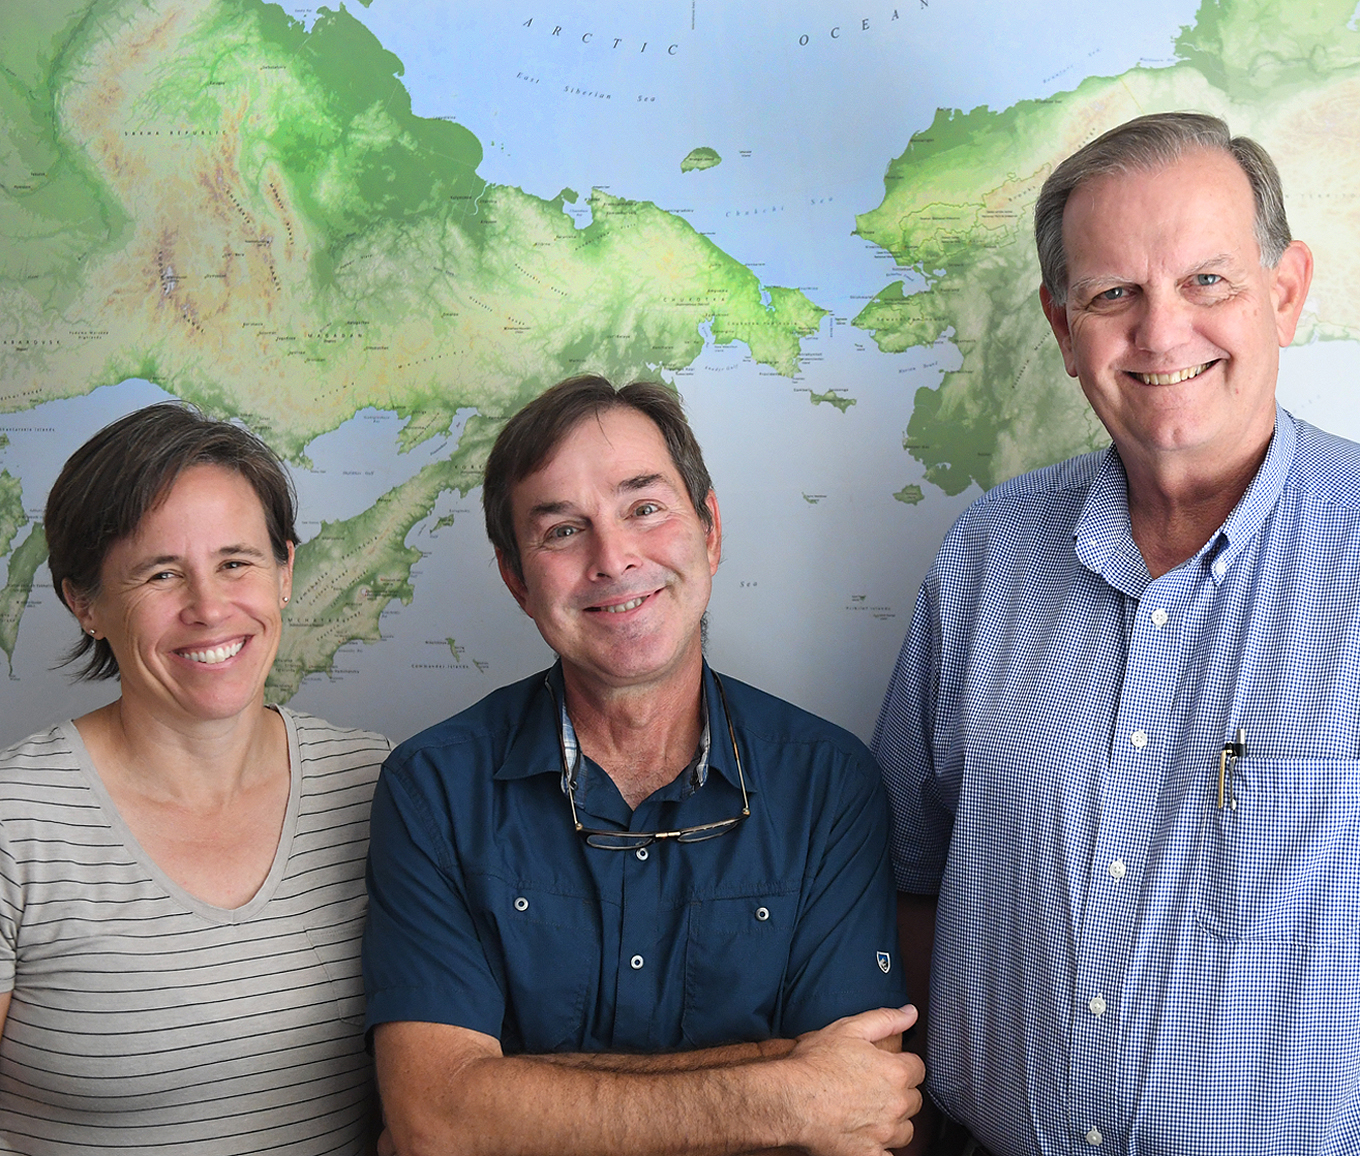 From left to right: Kelly Graf, Ted Goebel and Michael Waters of the Center for the Study of the First Americans, stand in front of a map showing where modern man crossed over from present day Siberia to North American while standing in their offices at The Anthropology Building on the A&M campus.